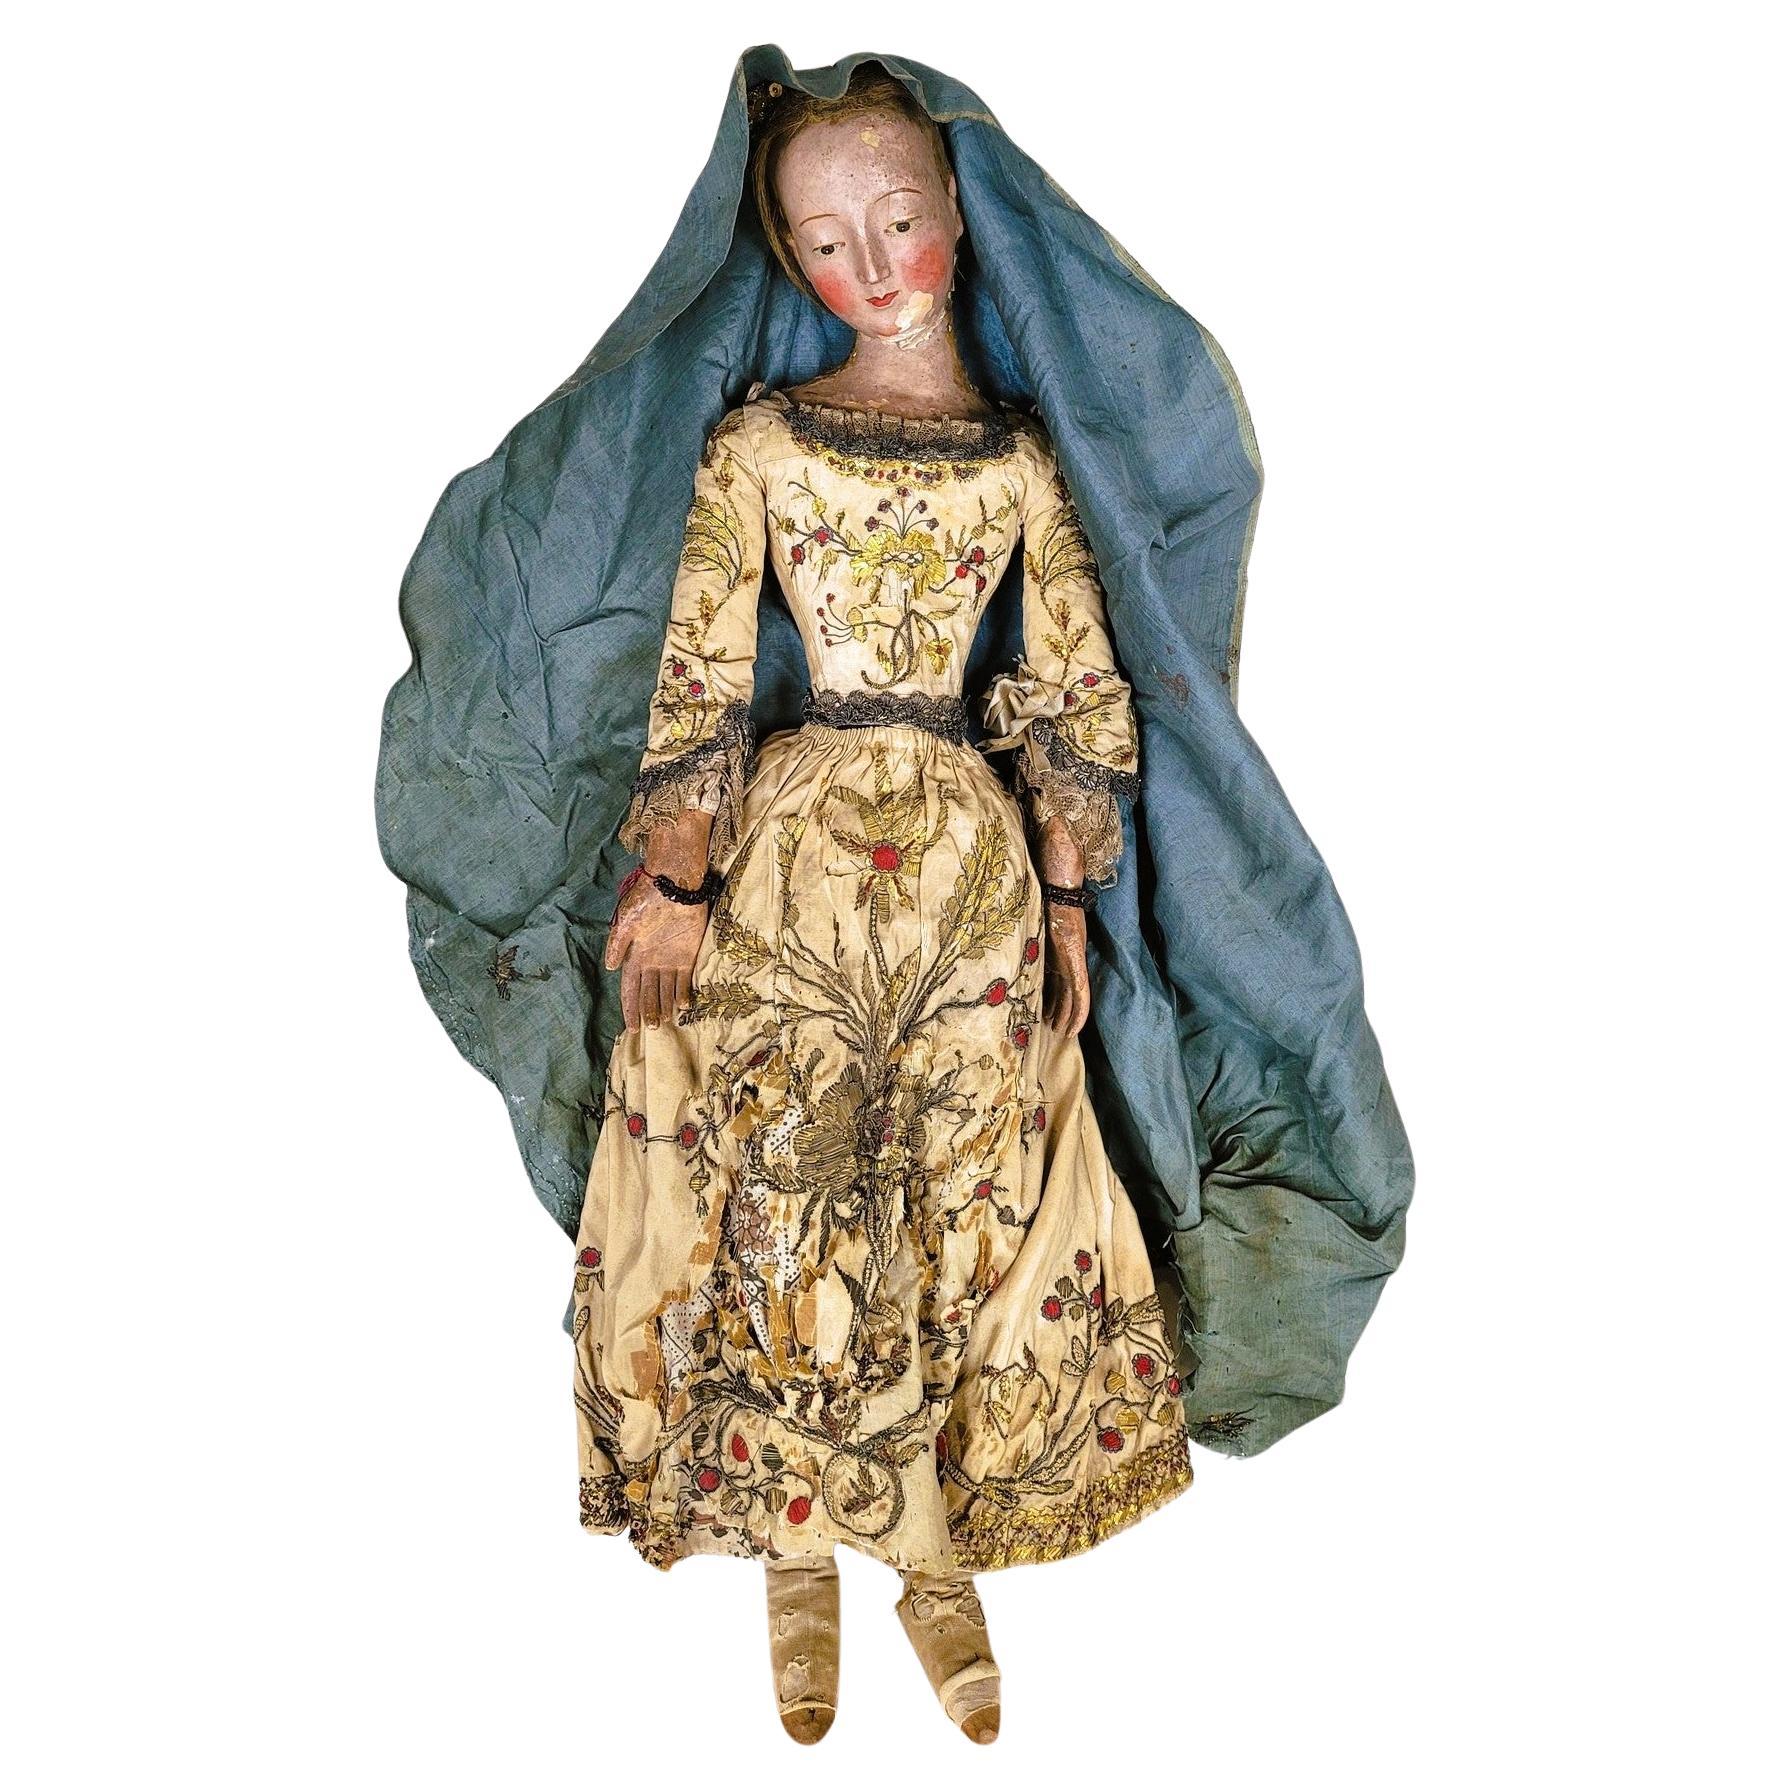 Articulated Doll, 18th Century For Sale